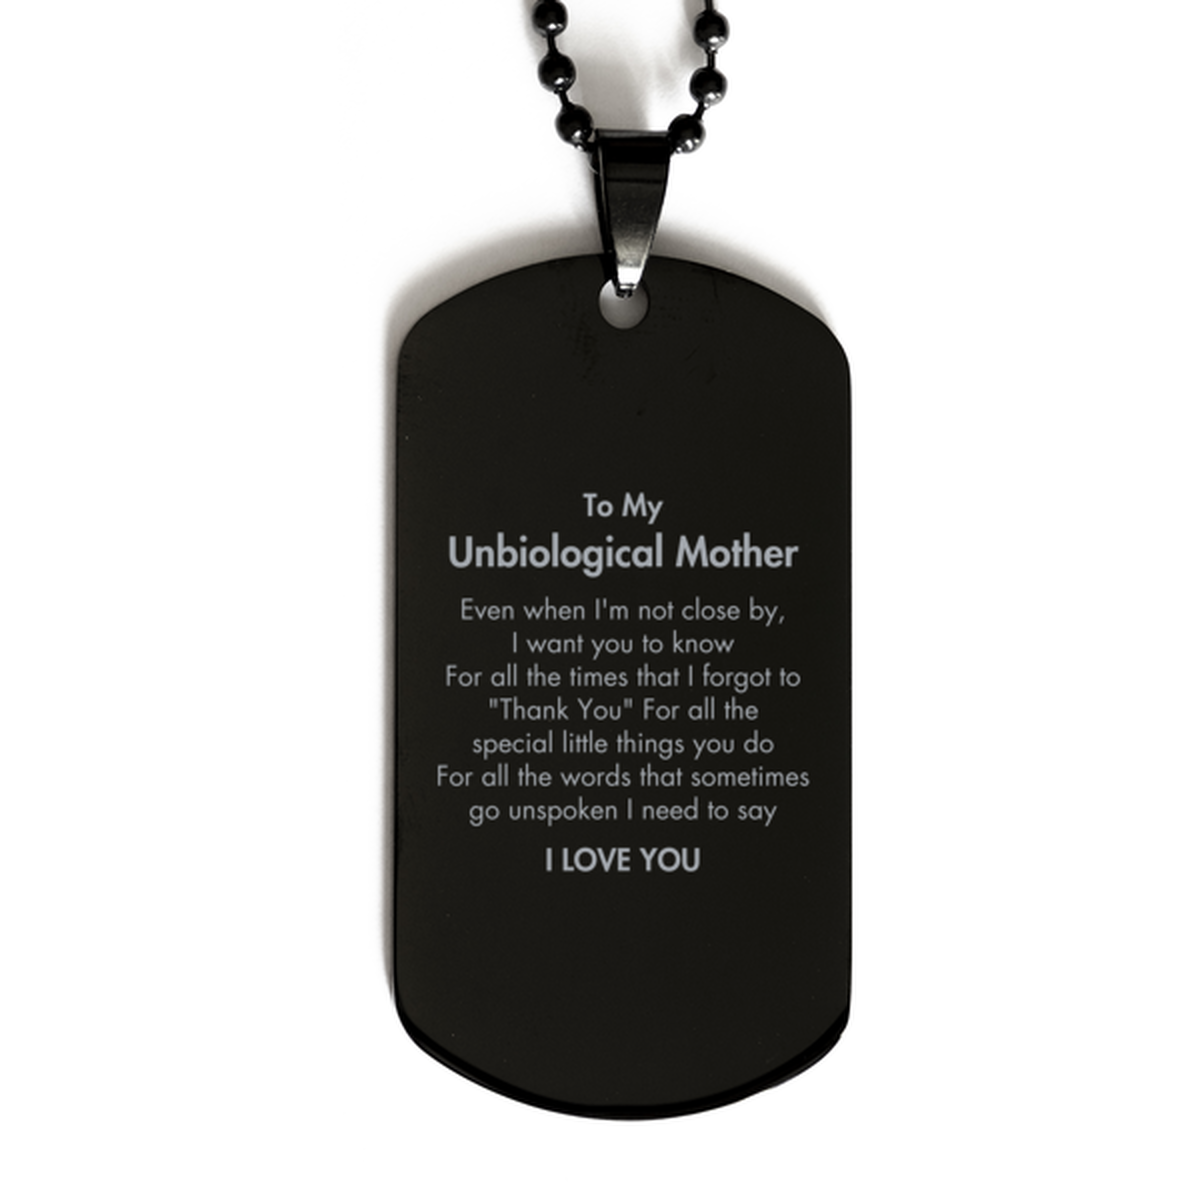 Thank You Gifts for Unbiological Mother, Keepsake Black Dog Tag Gifts for Unbiological Mother Birthday Mother's day Father's Day Unbiological Mother For all the words That sometimes go unspoken I need to say I LOVE YOU